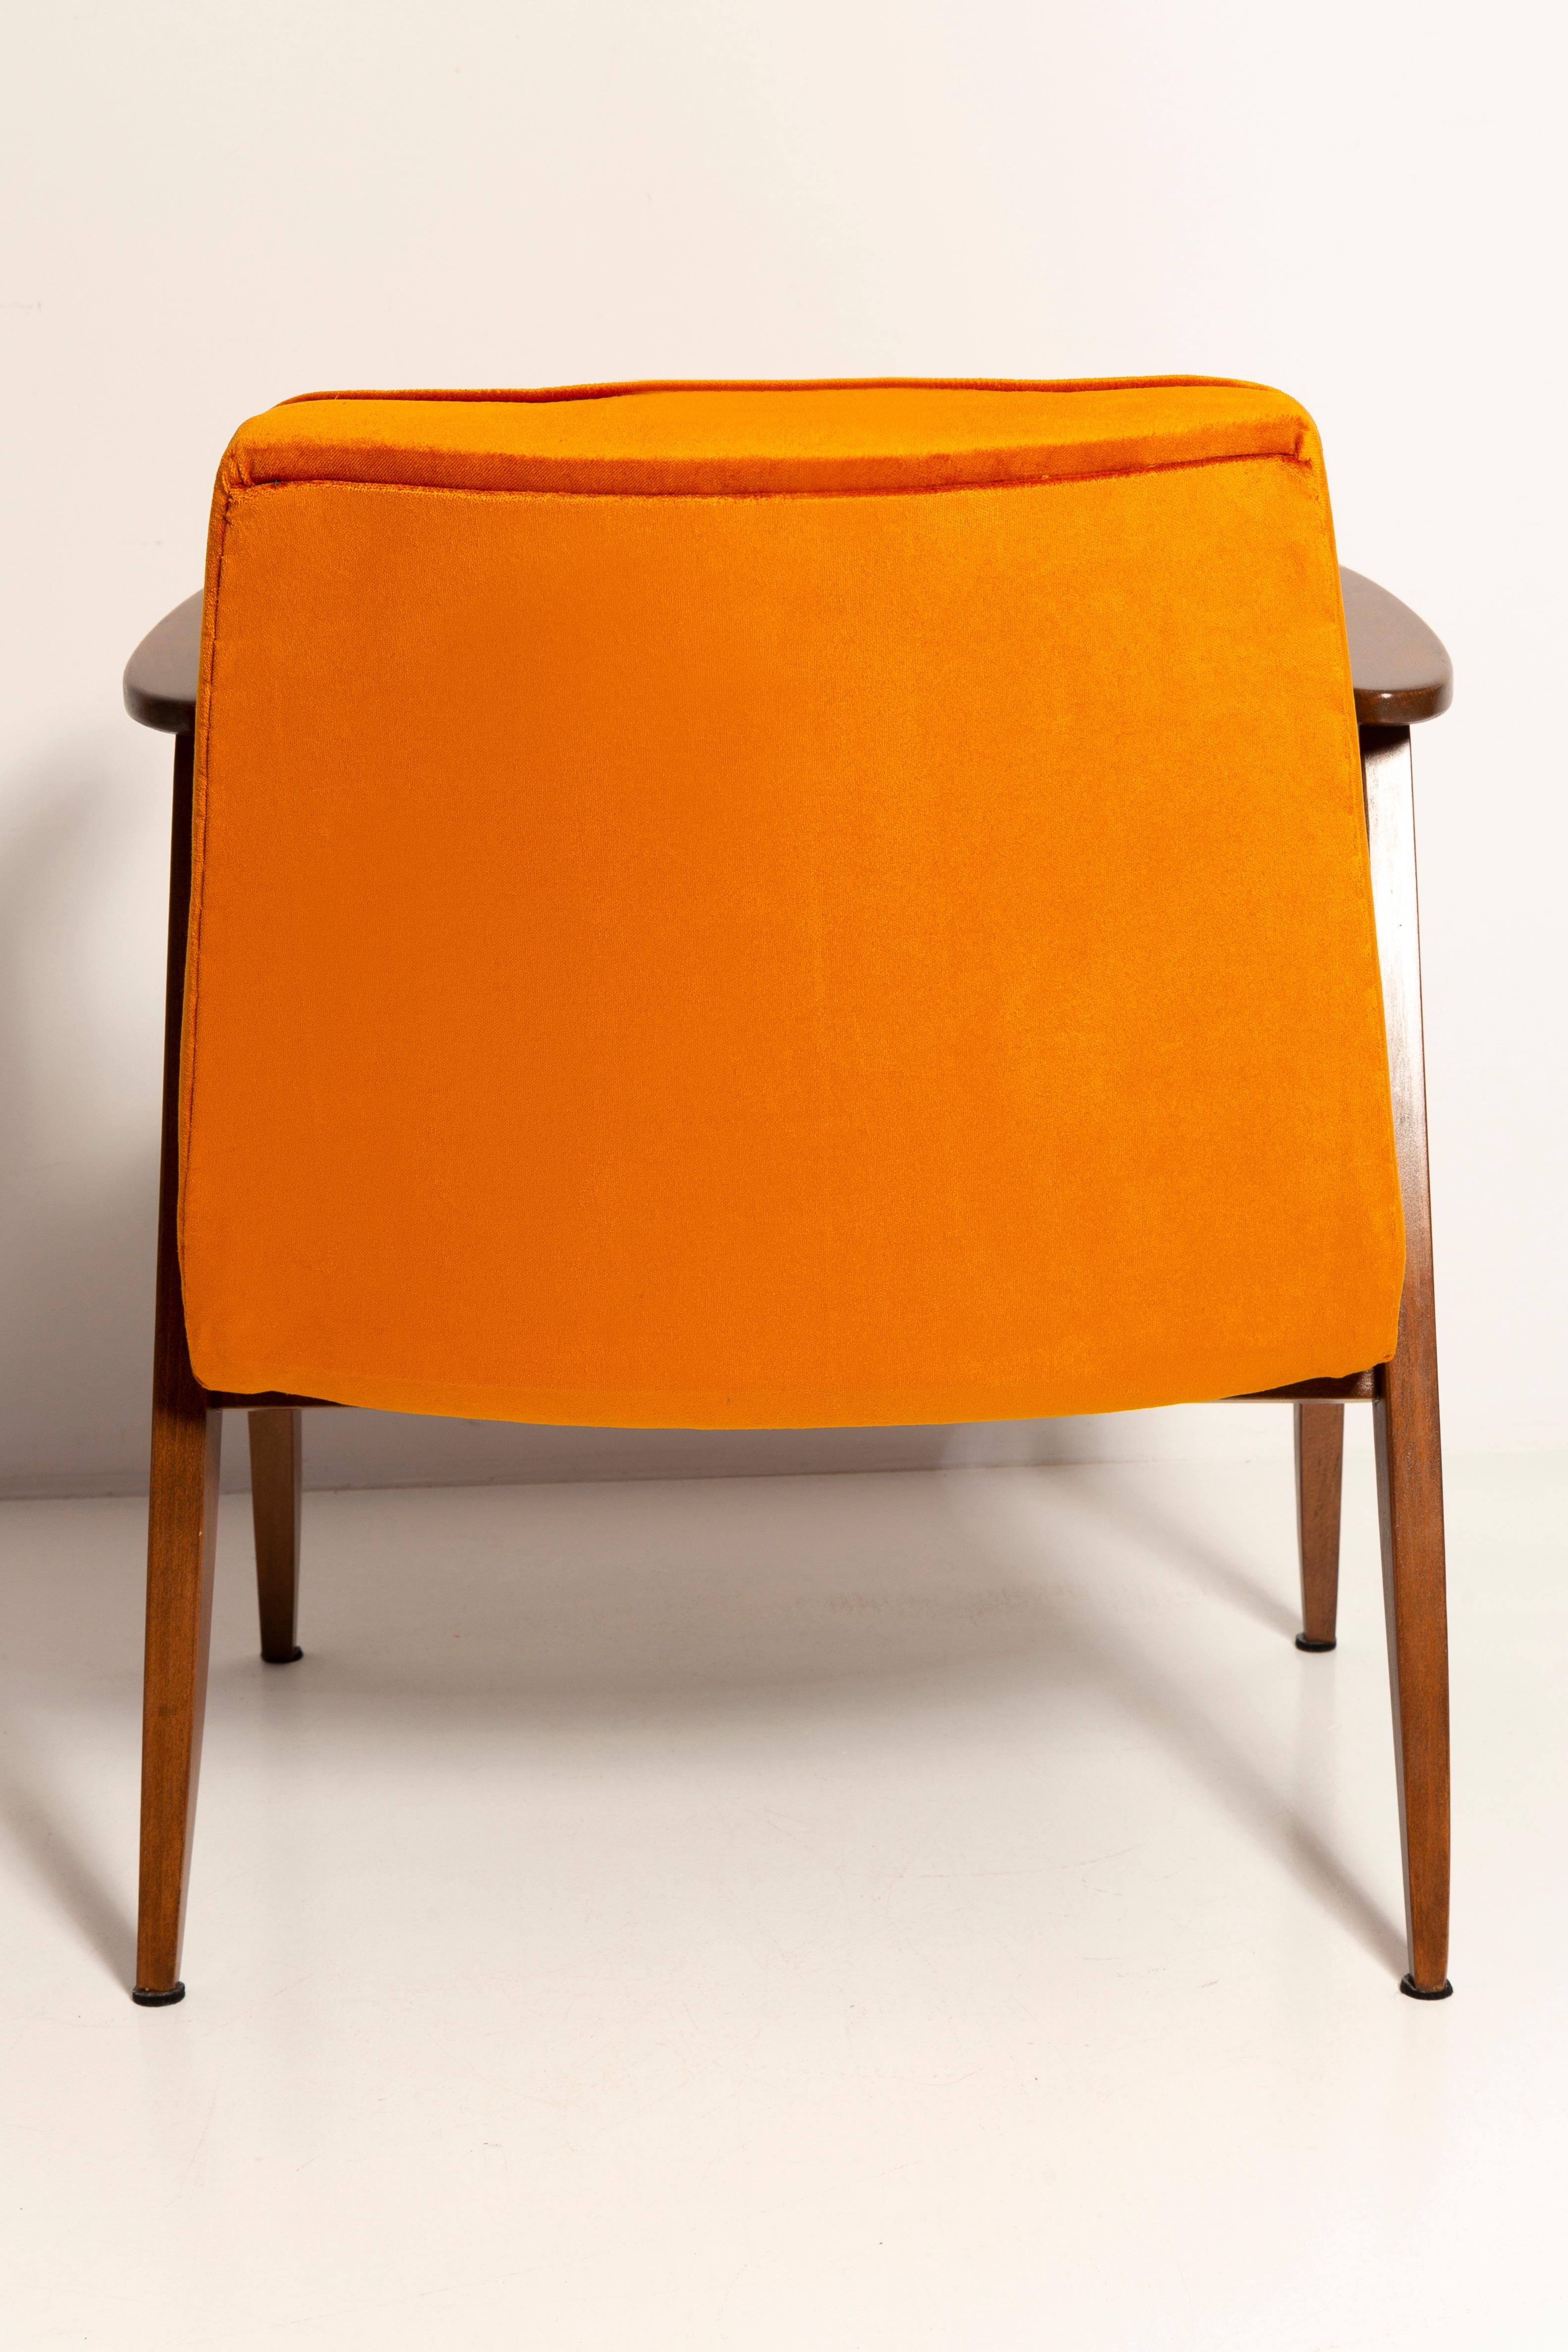 Pair of Mid-Century 366 Armchairs, Green and Orange, by Chierowski Europe, 1960s For Sale 7